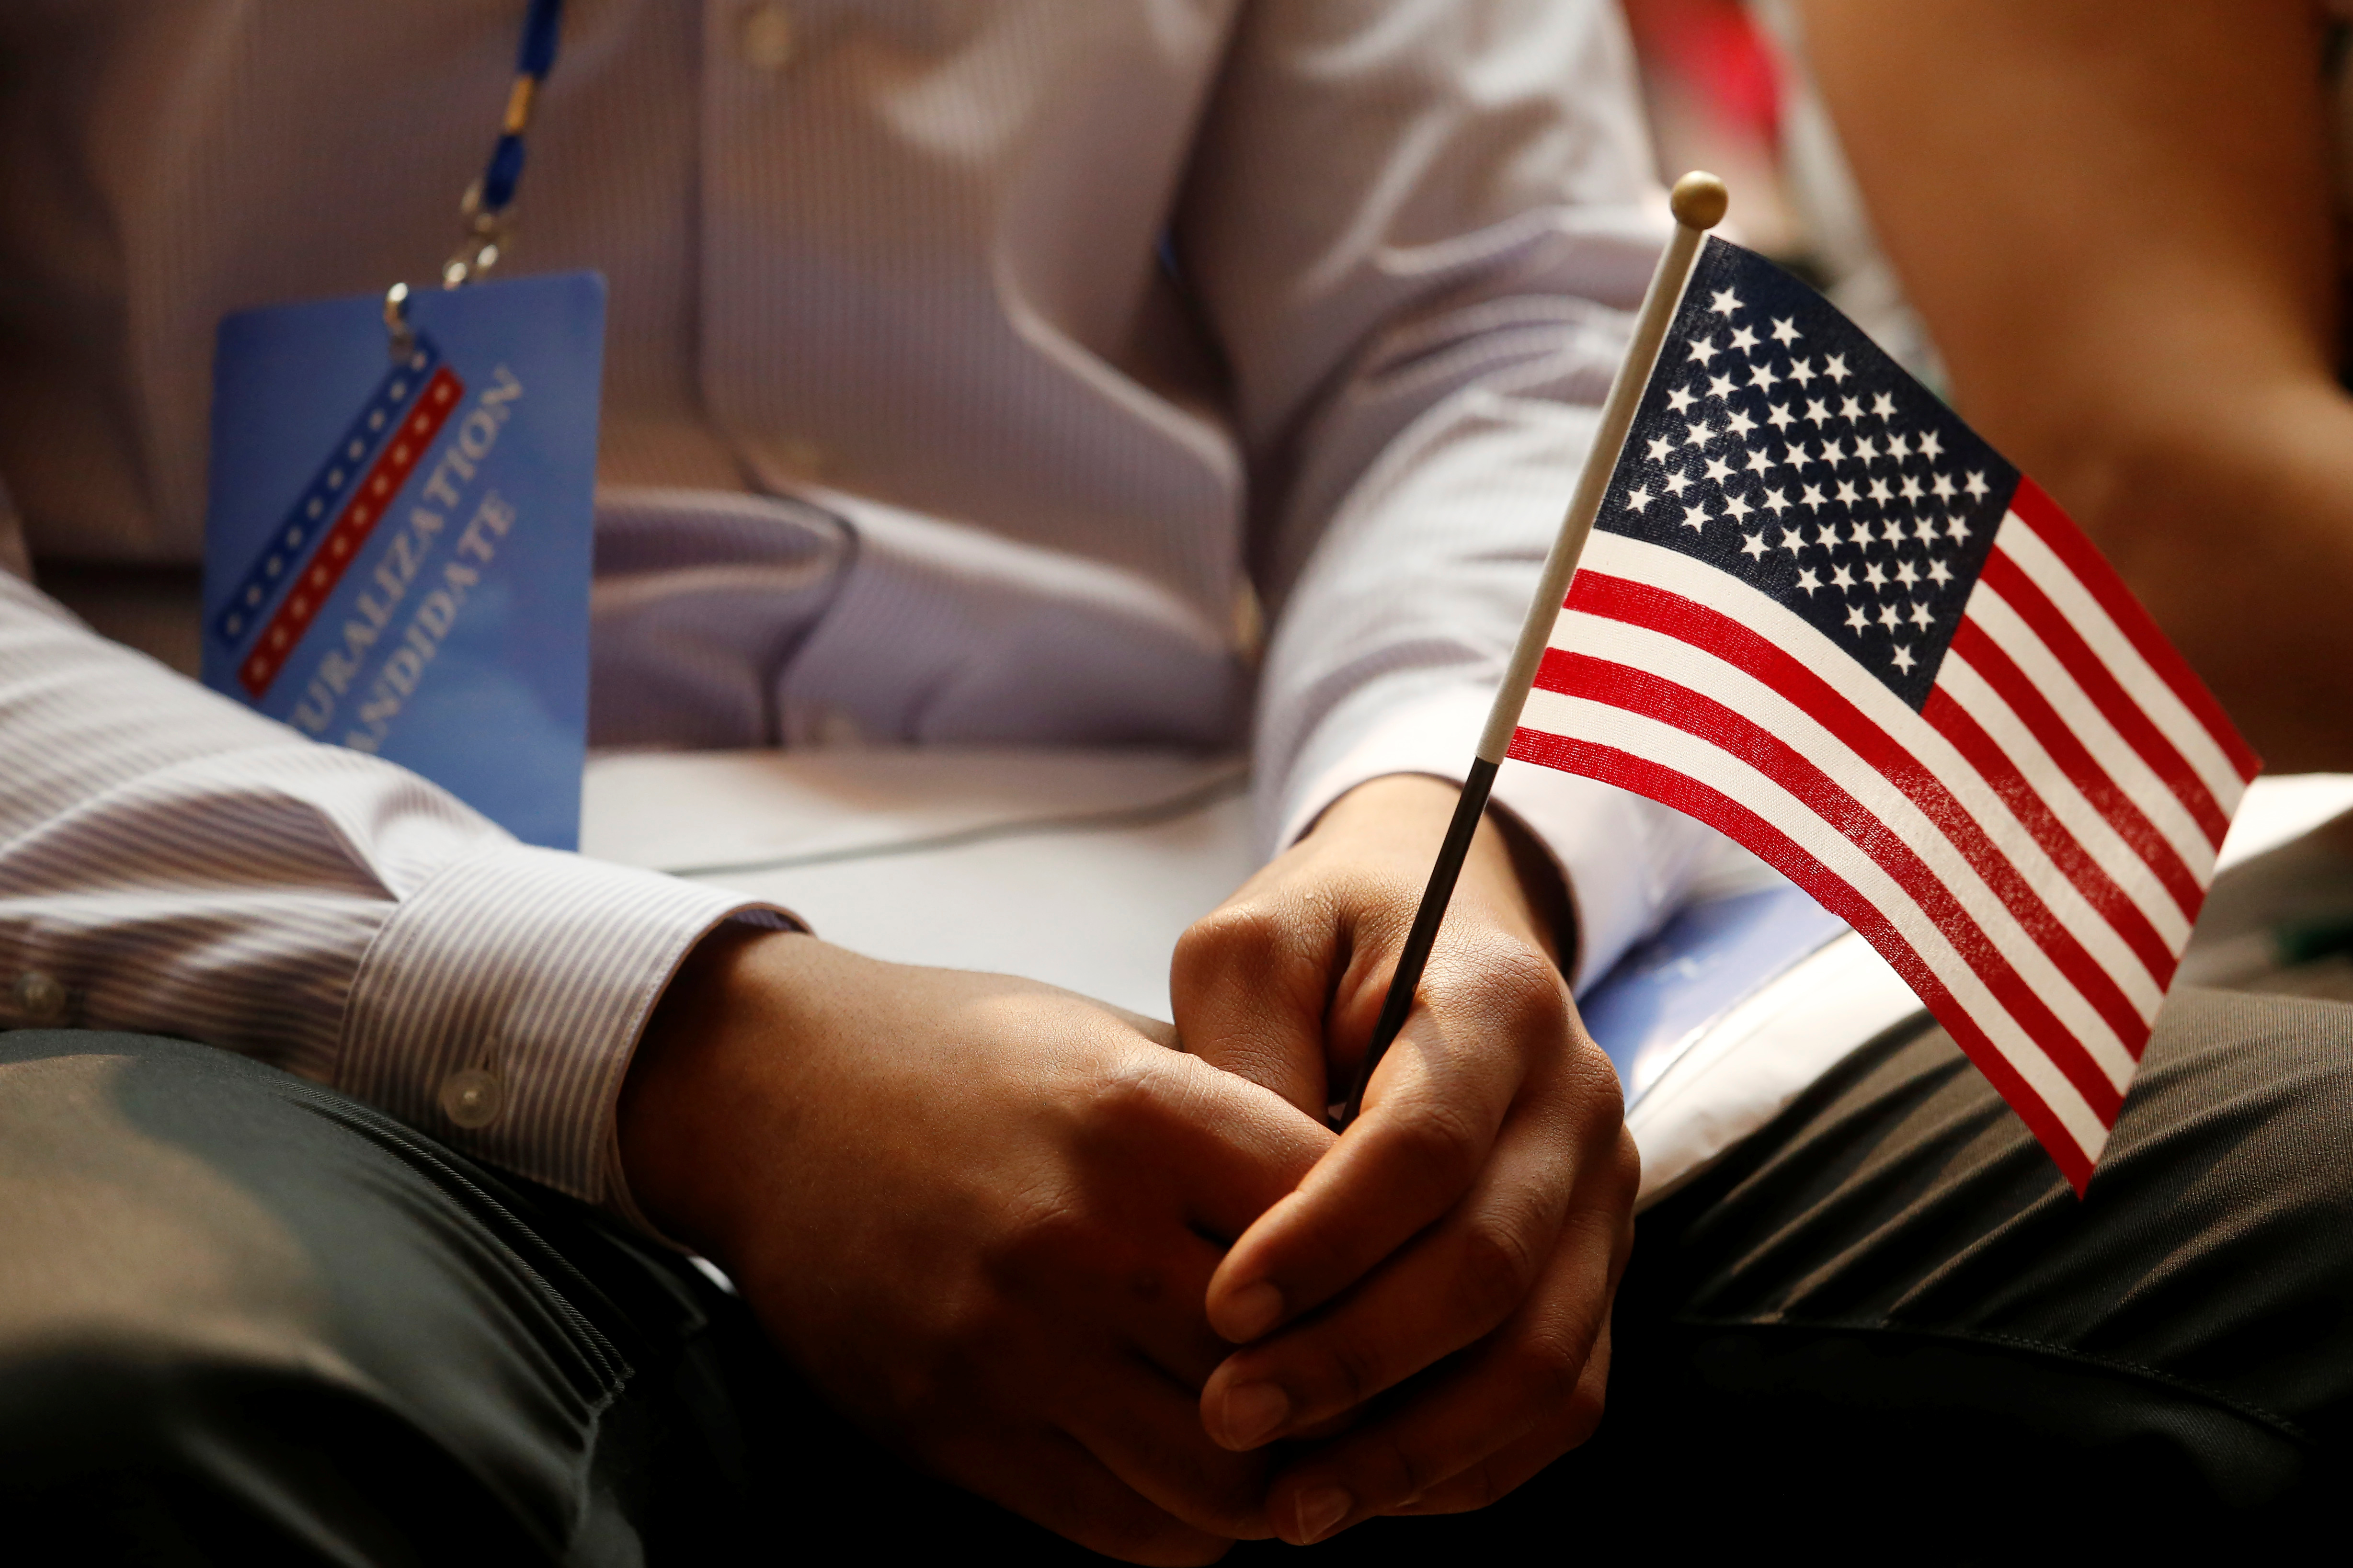 A new citizen holds a U.S. flag at the U.S. Citizenship and Immigration Services (USCIS) naturalization ceremony at the New York Public Library in Manhattan